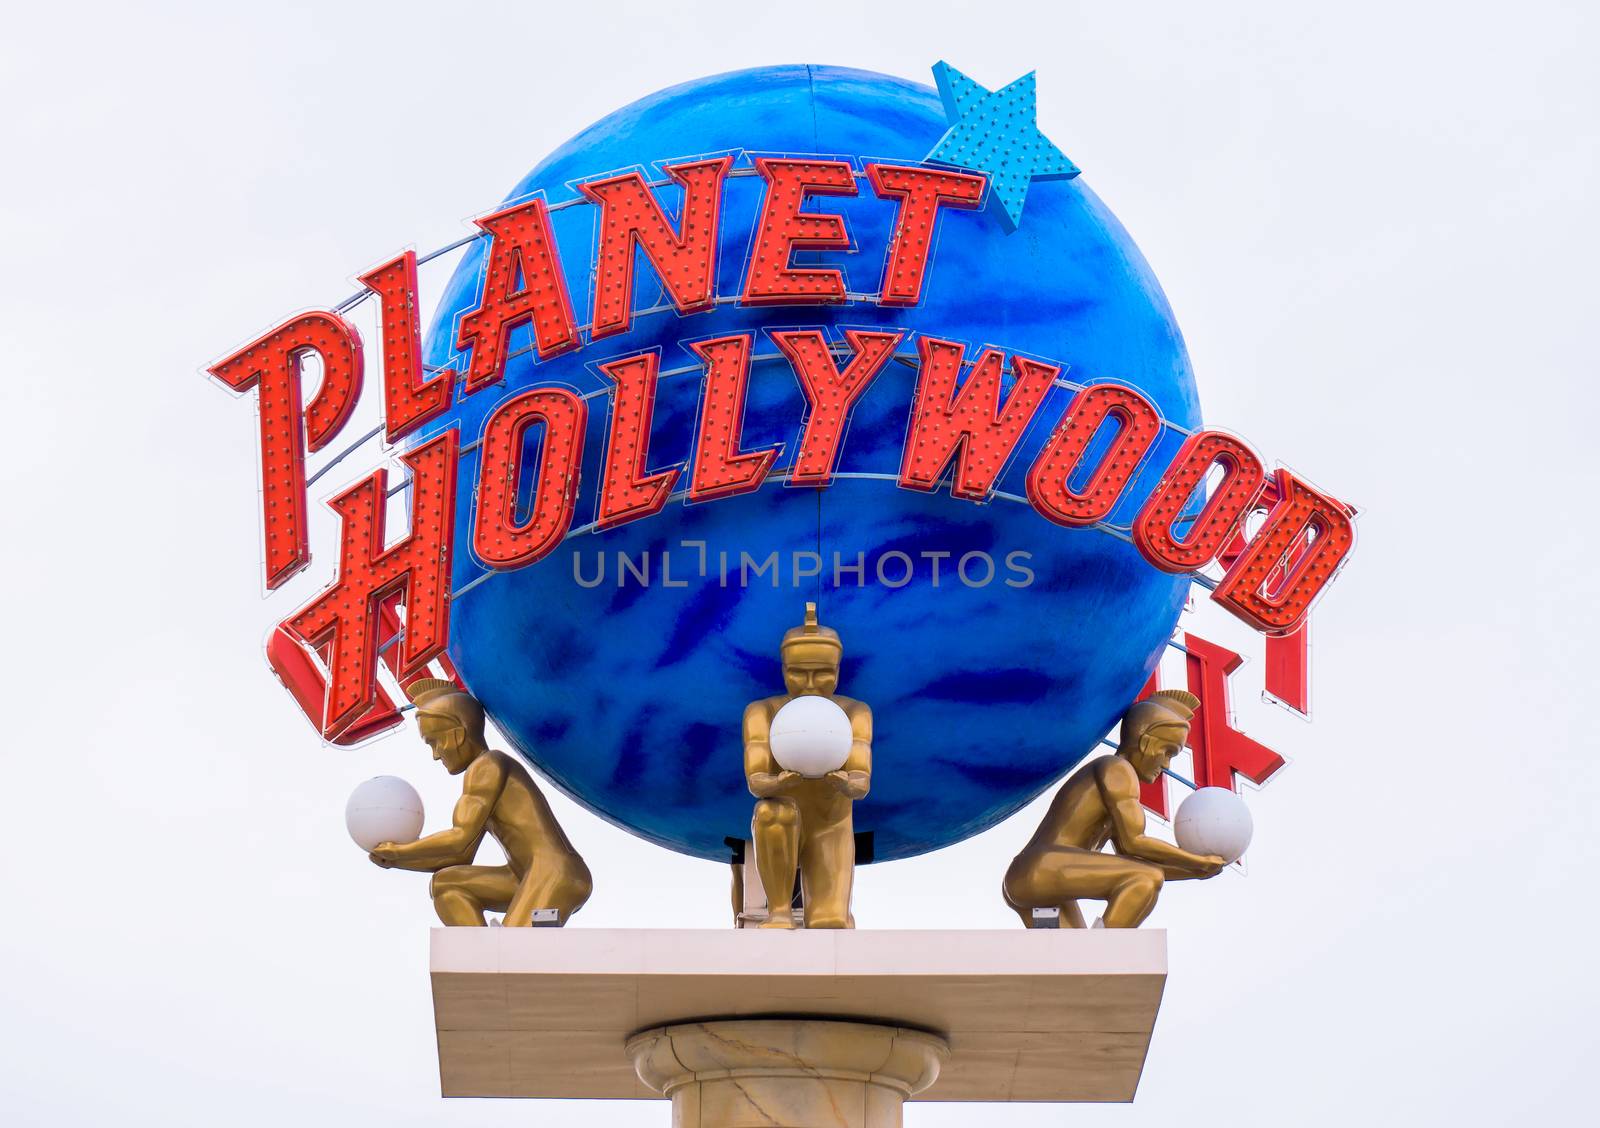 Planet Hollywood Sign and Logo by wolterk